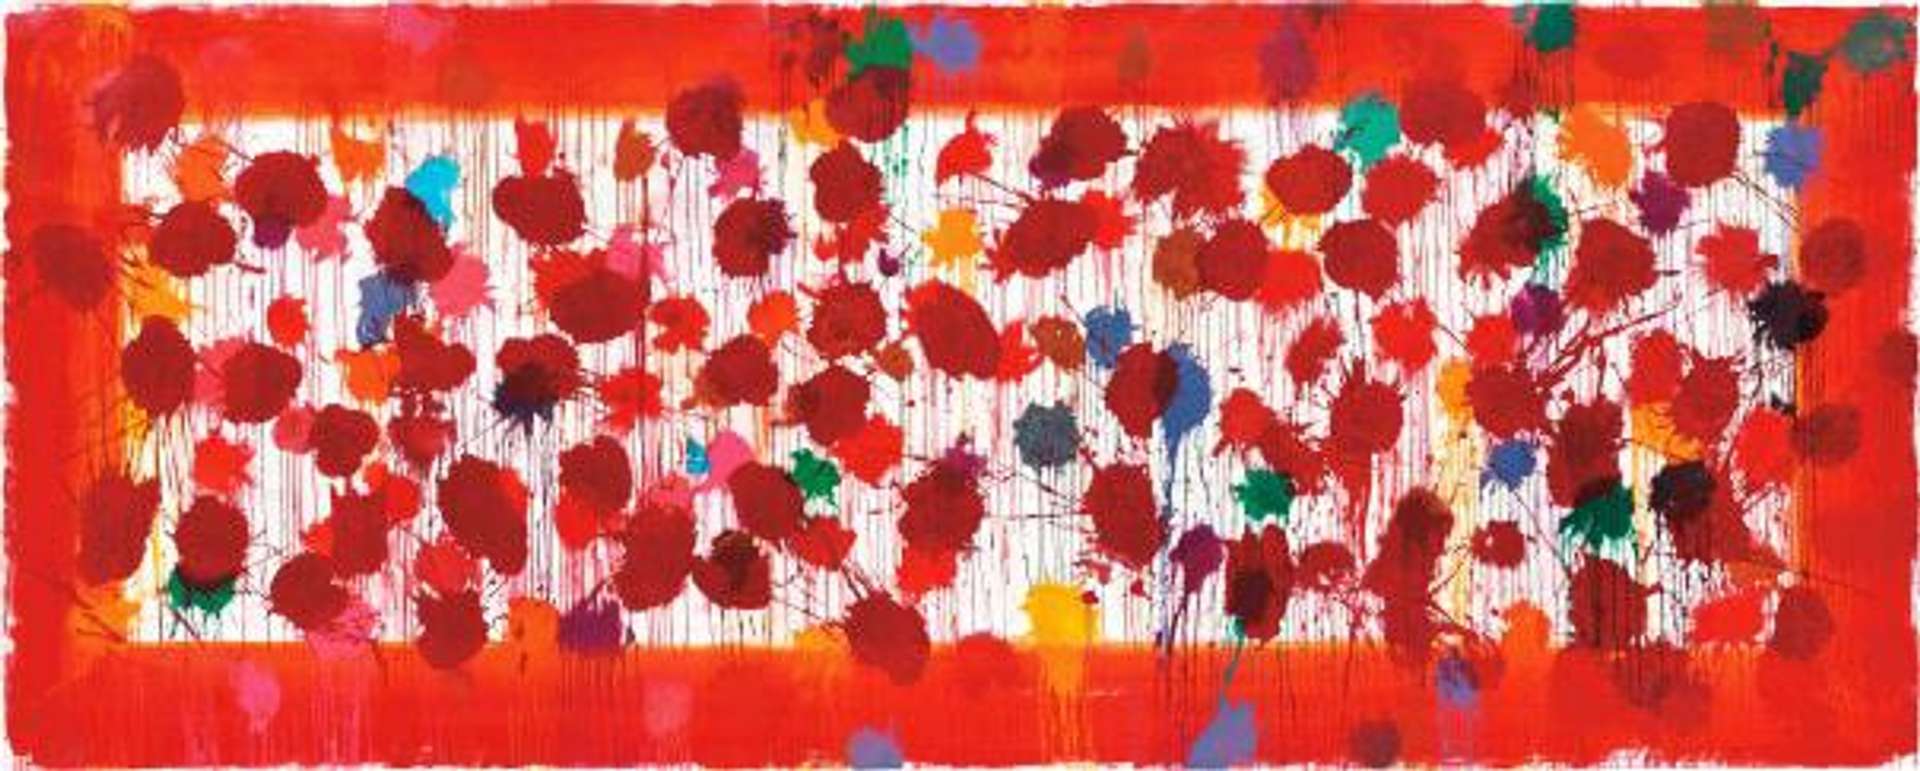 As Time Goes By (red) - Signed Print by Howard Hodgkin 2009 - MyArtBroker